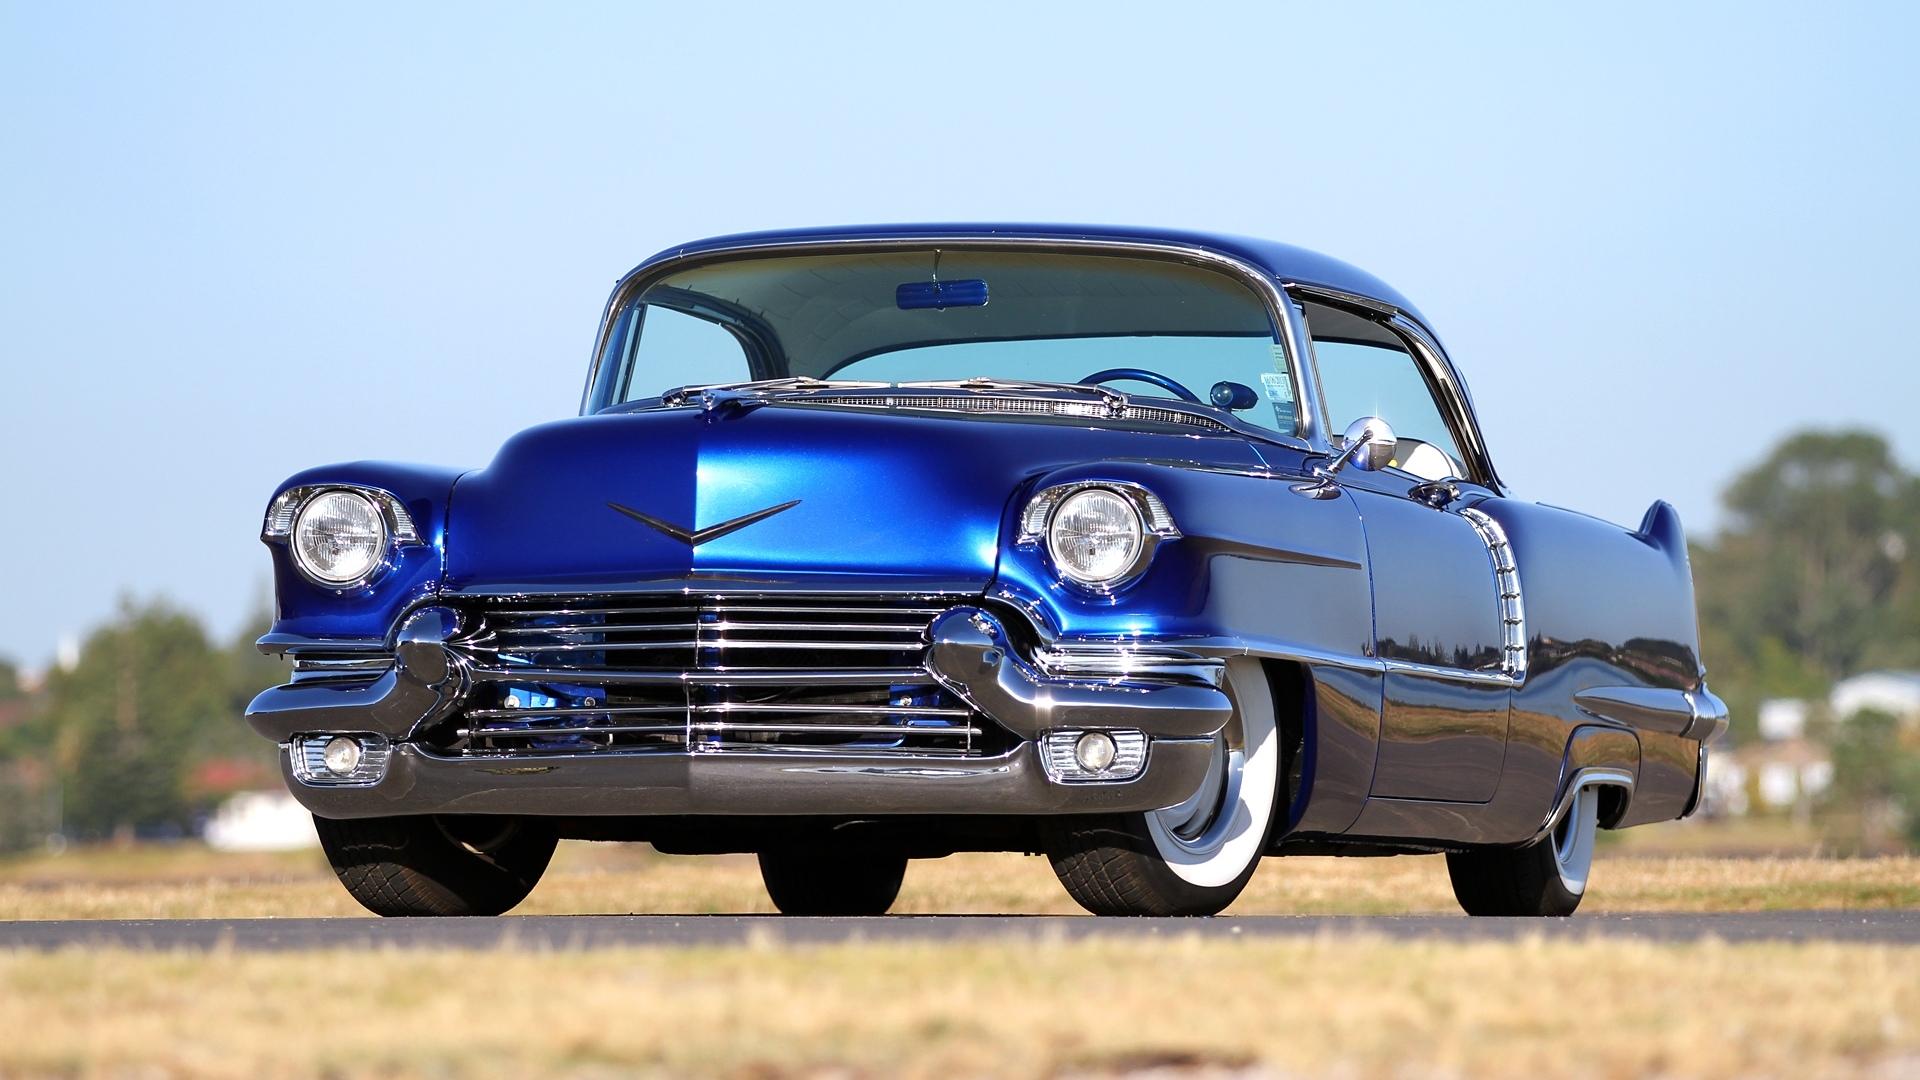 1956 Cadillac wallpapers HD quality